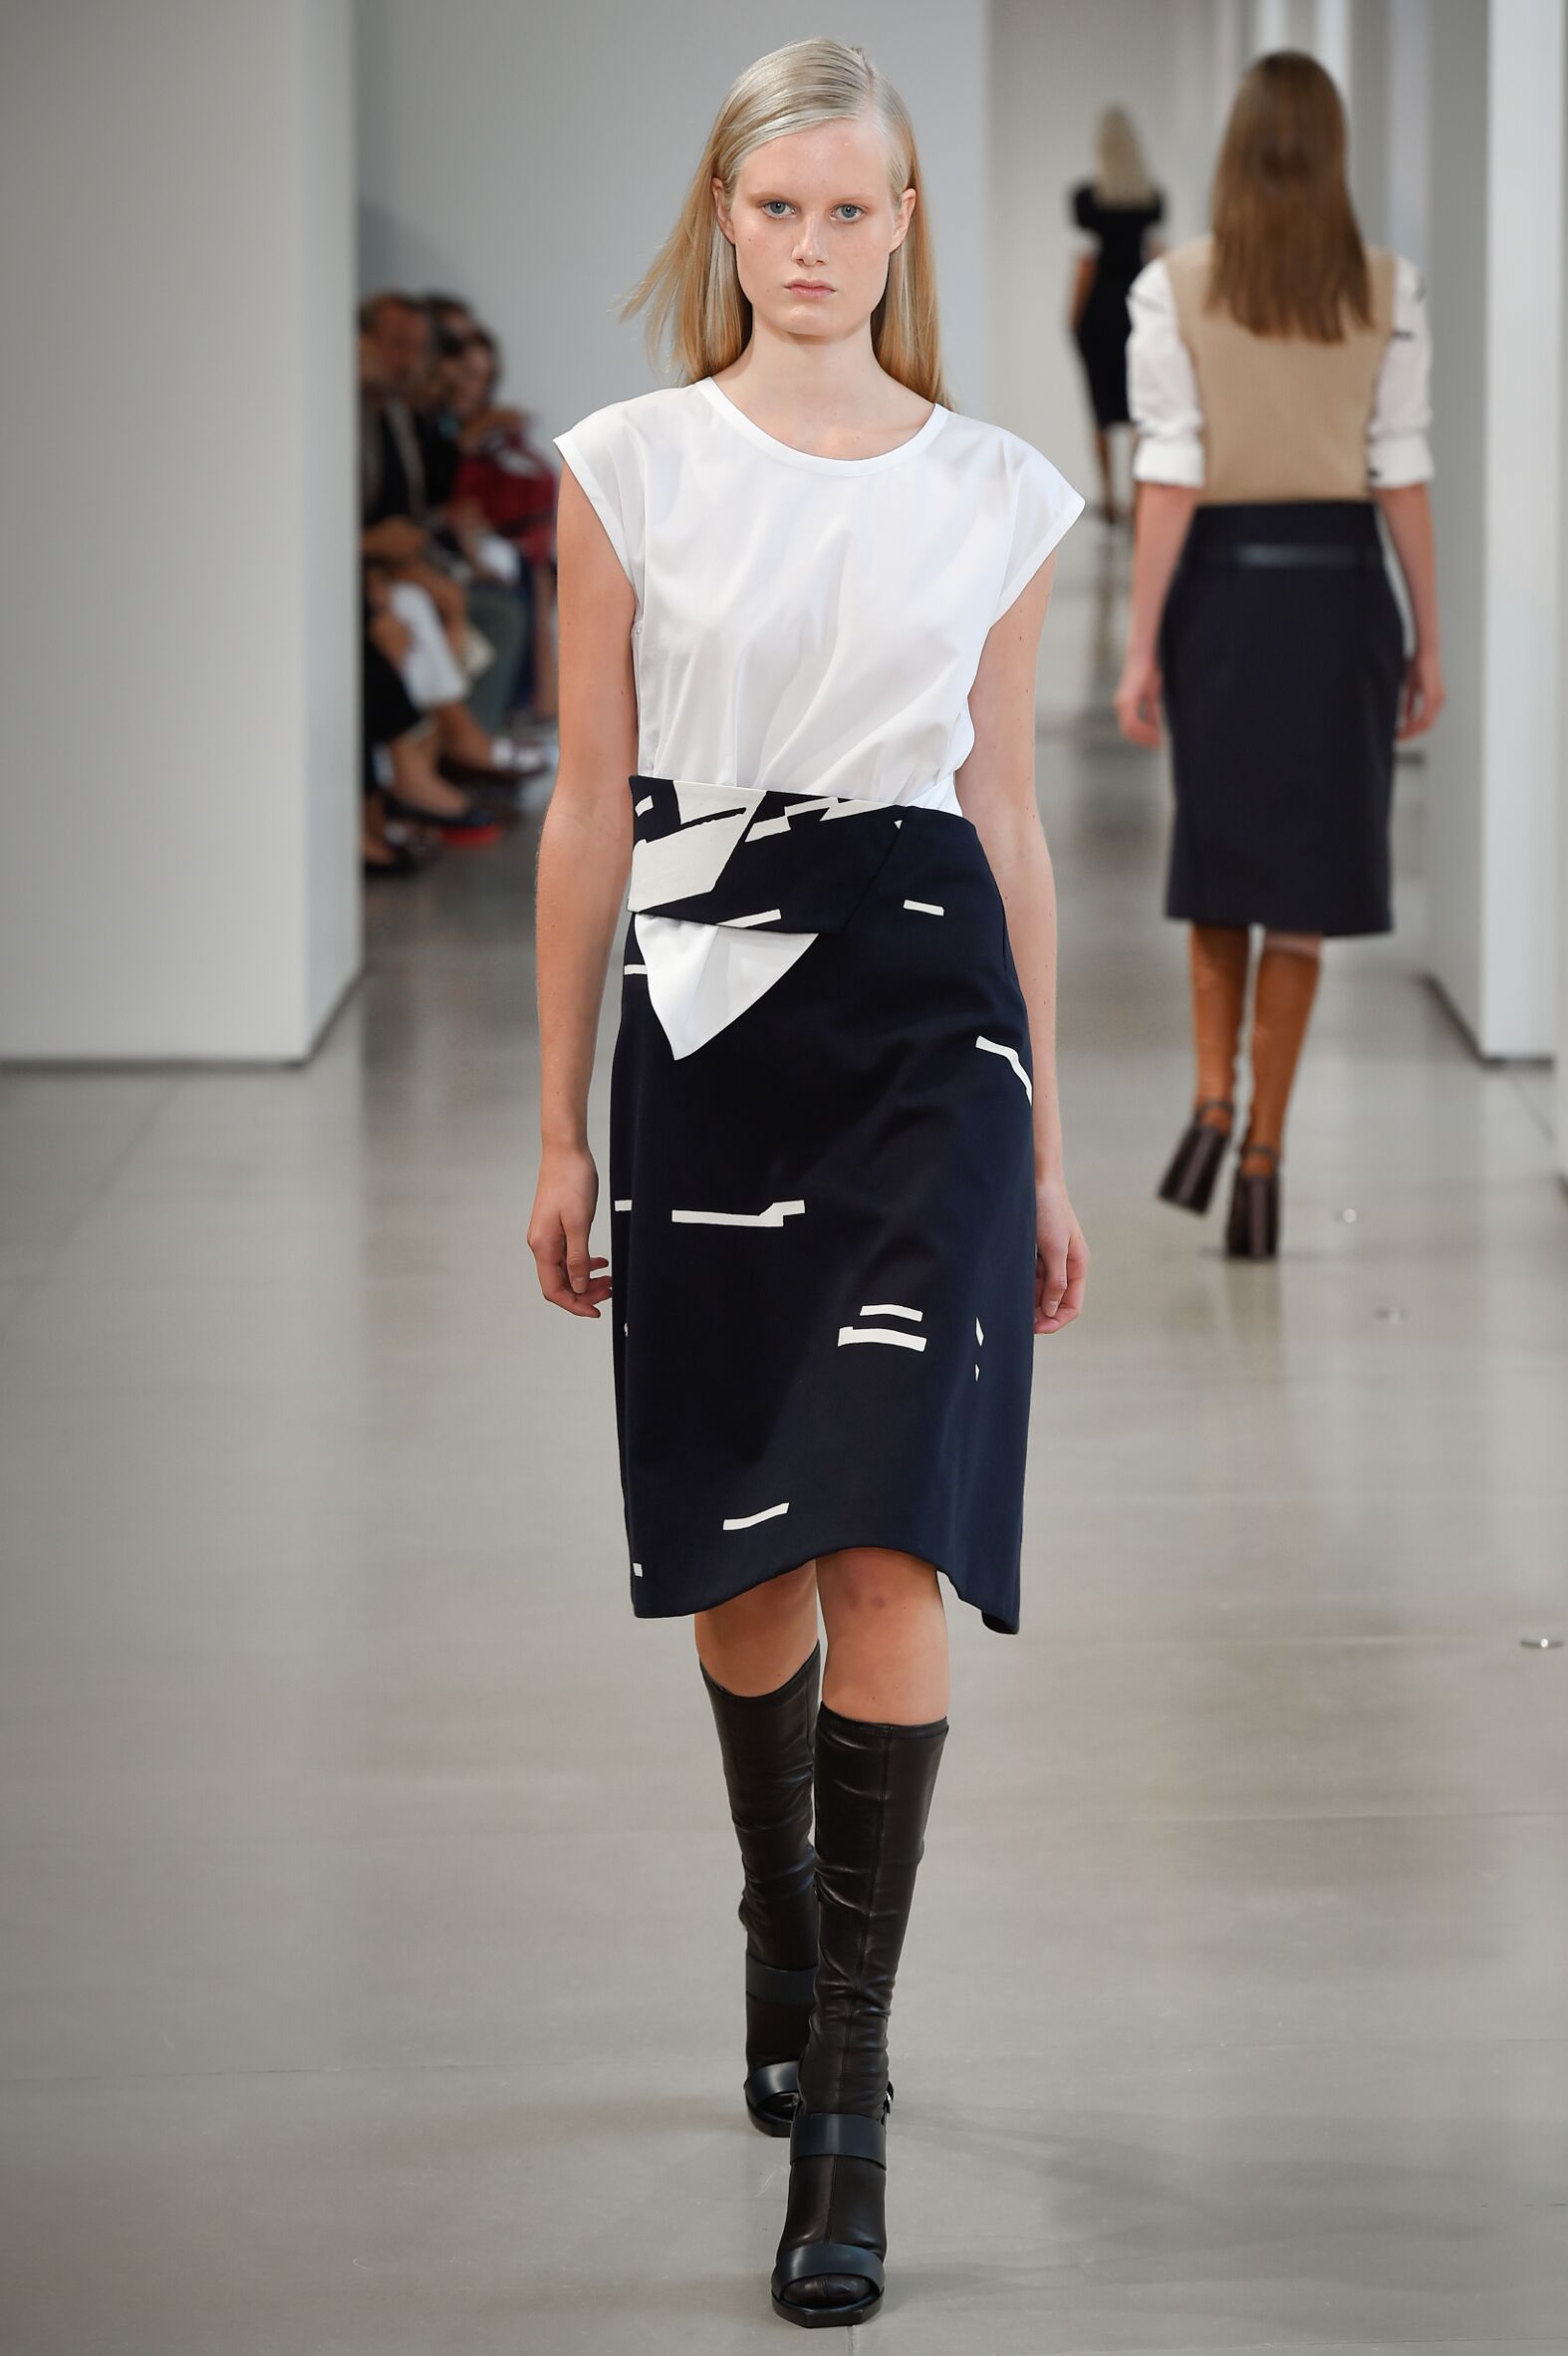 JIL SANDER SPRING SUMMER 2015 WOMEN'S COLLECTION | The Skinny Beep